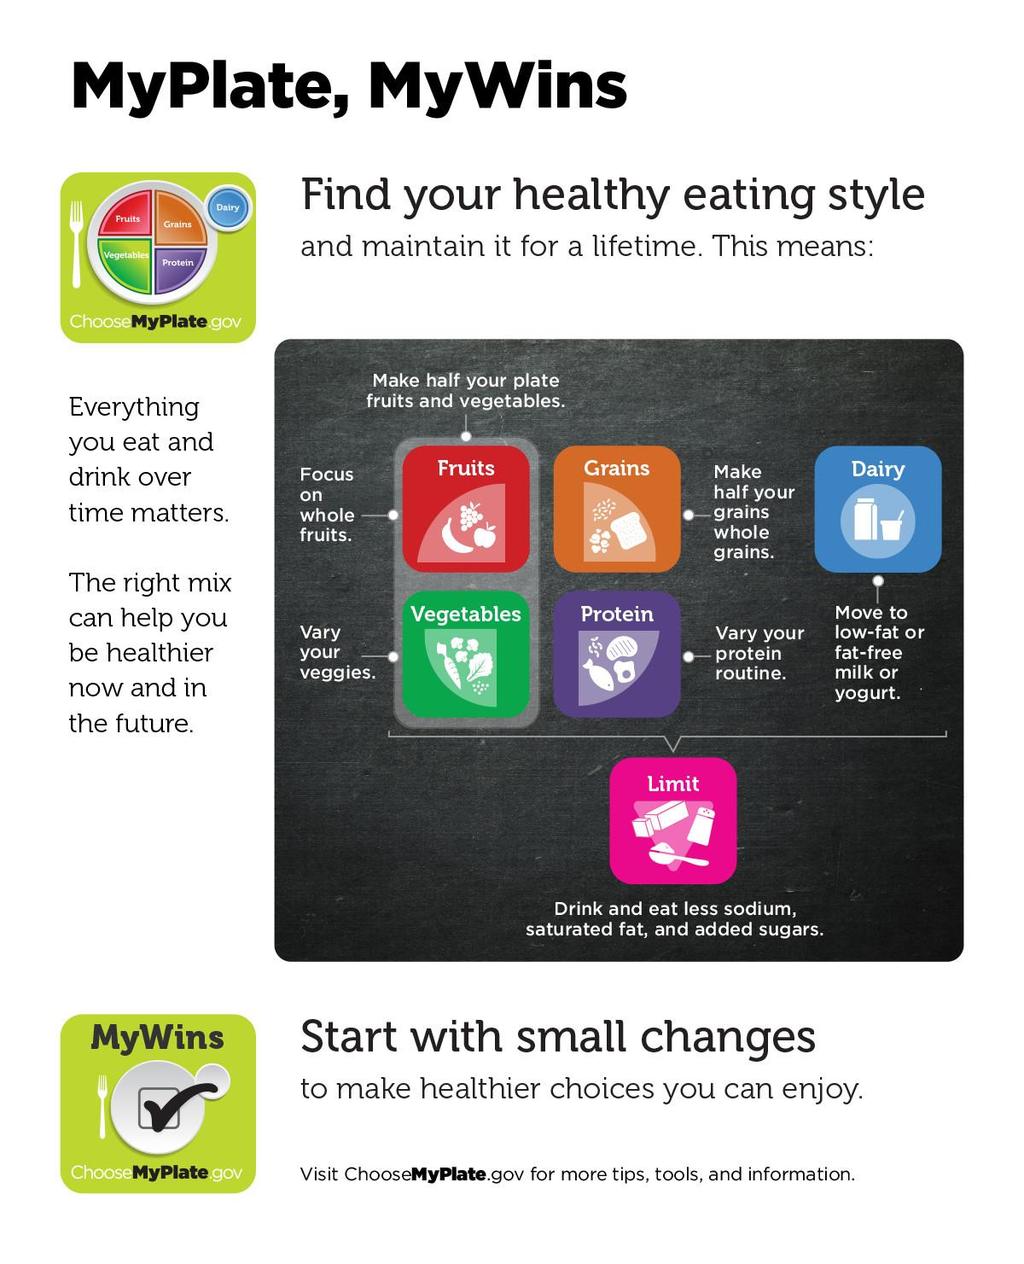 The Dietary Guidelines provides information on how to: make smart food choices, balance food intake with